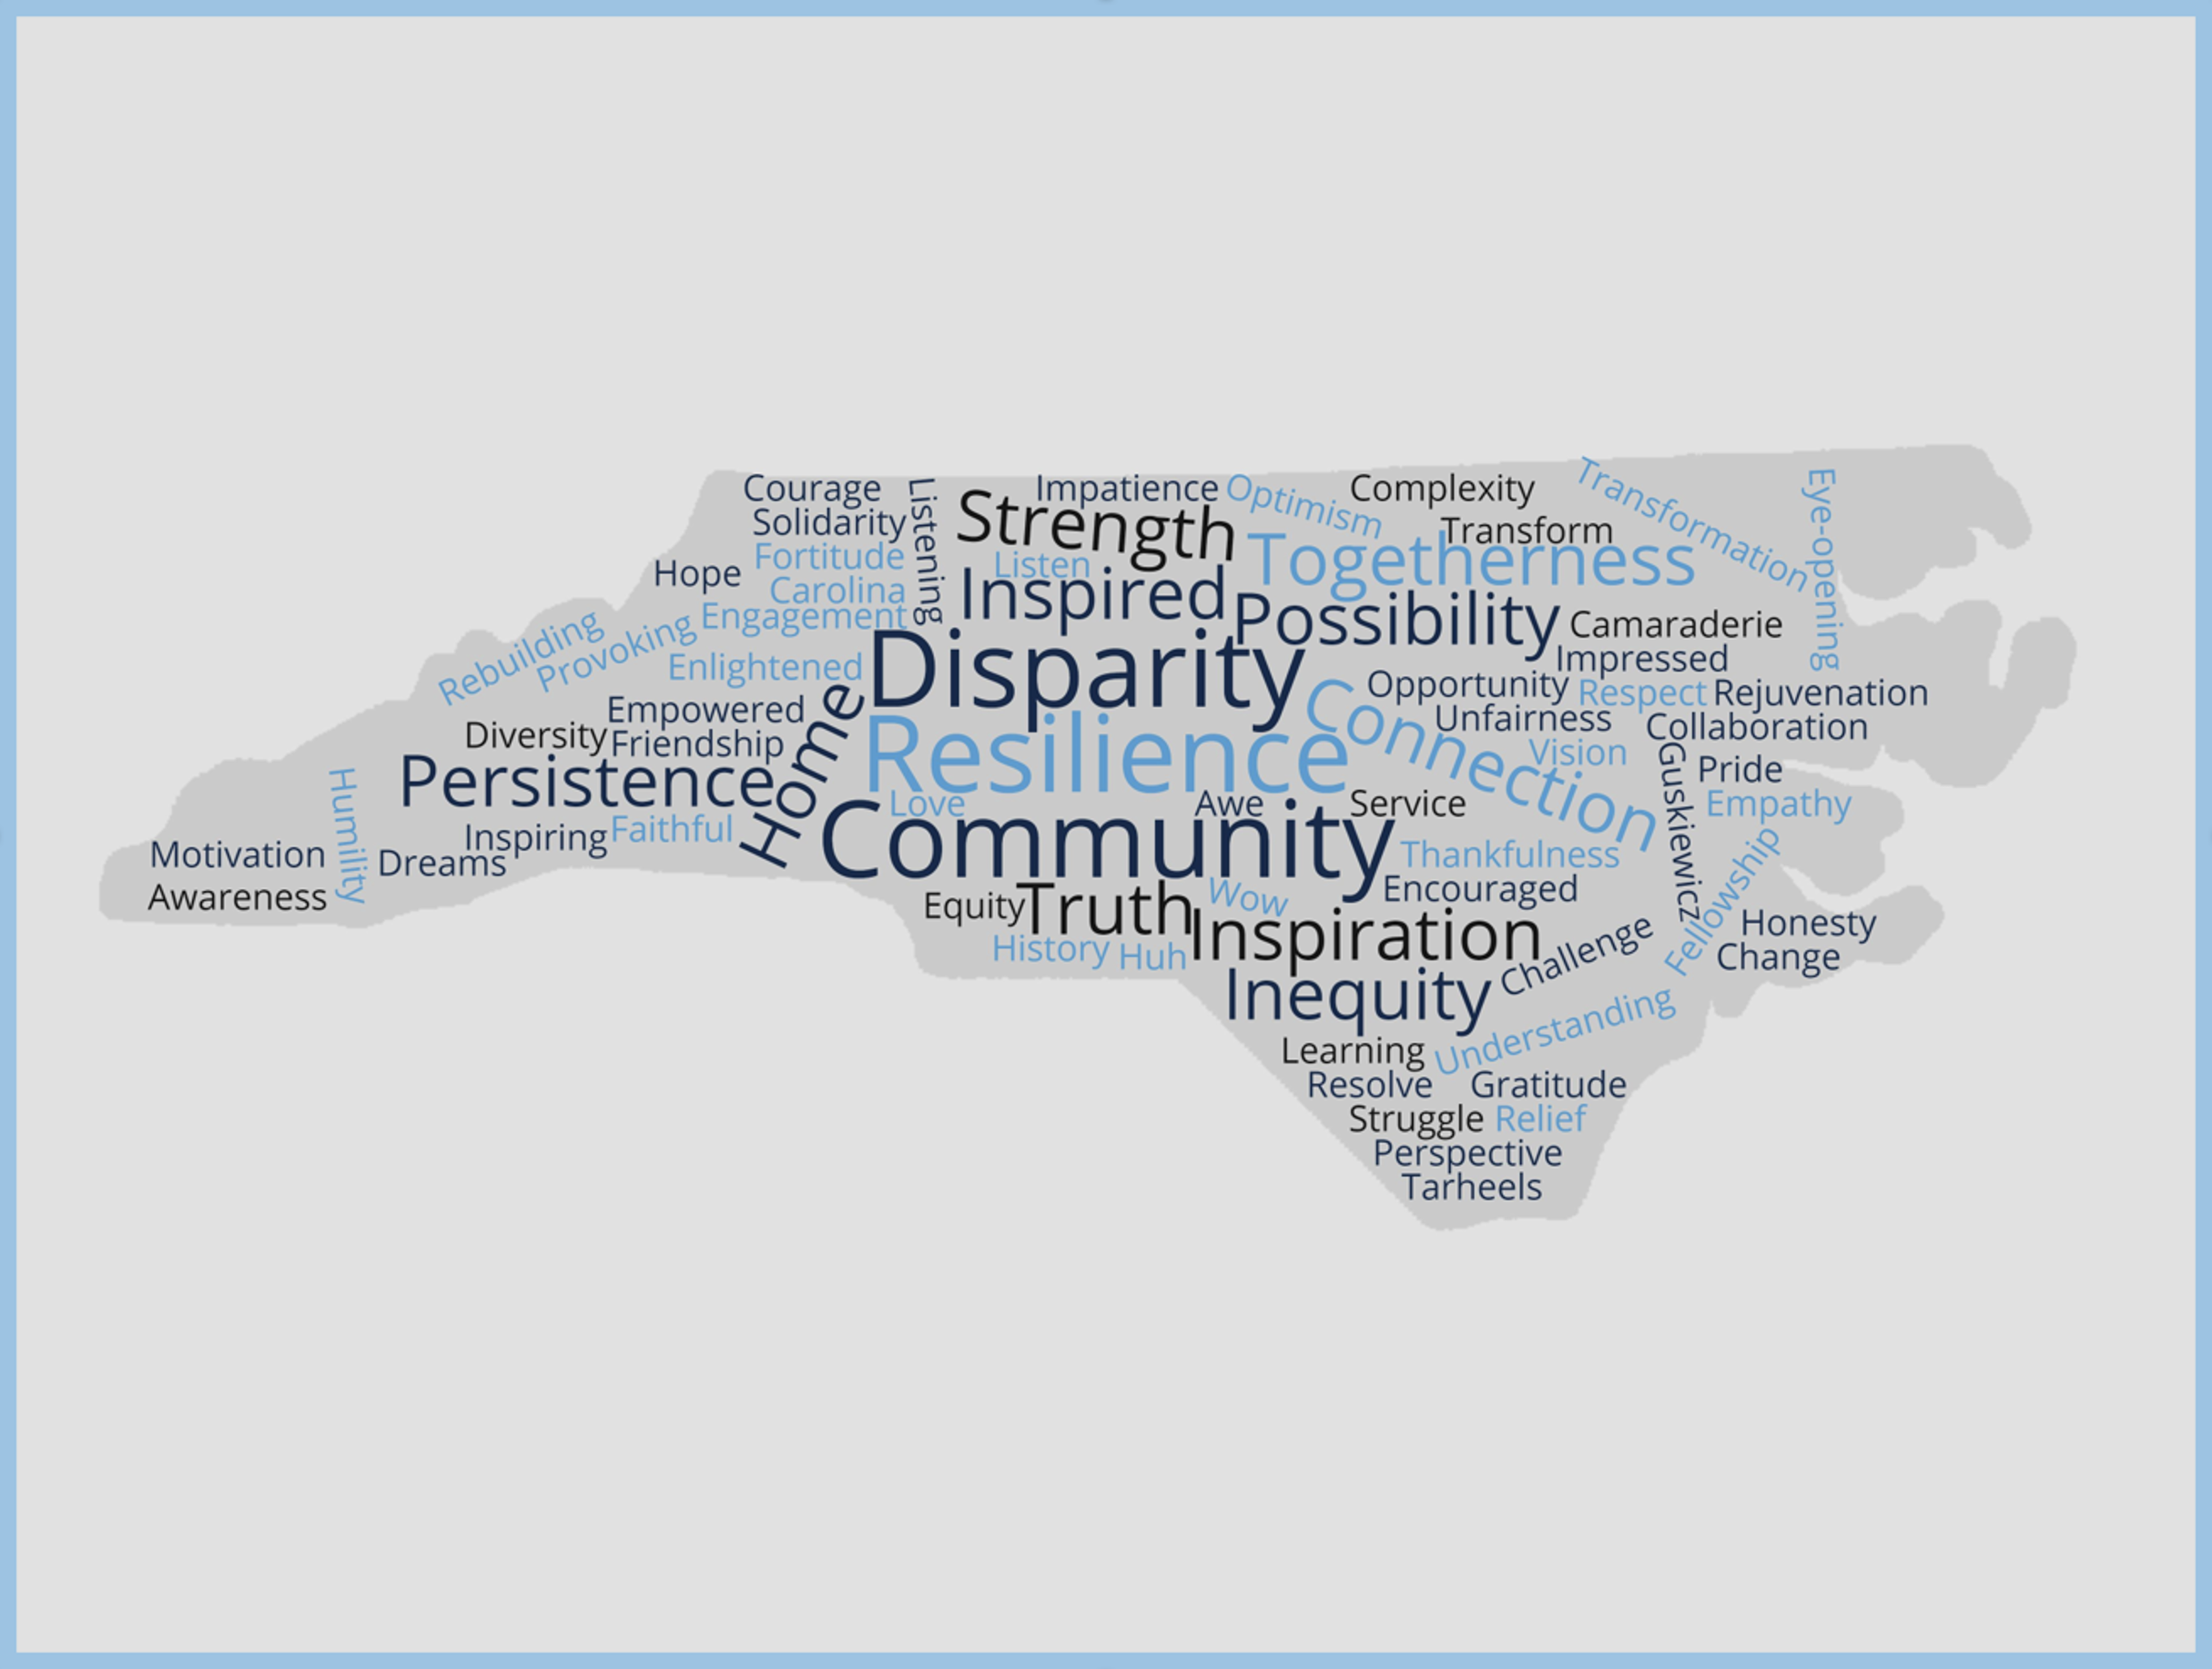 State of NC with word cloud. Prominent words: Community, Disparity, Resilience